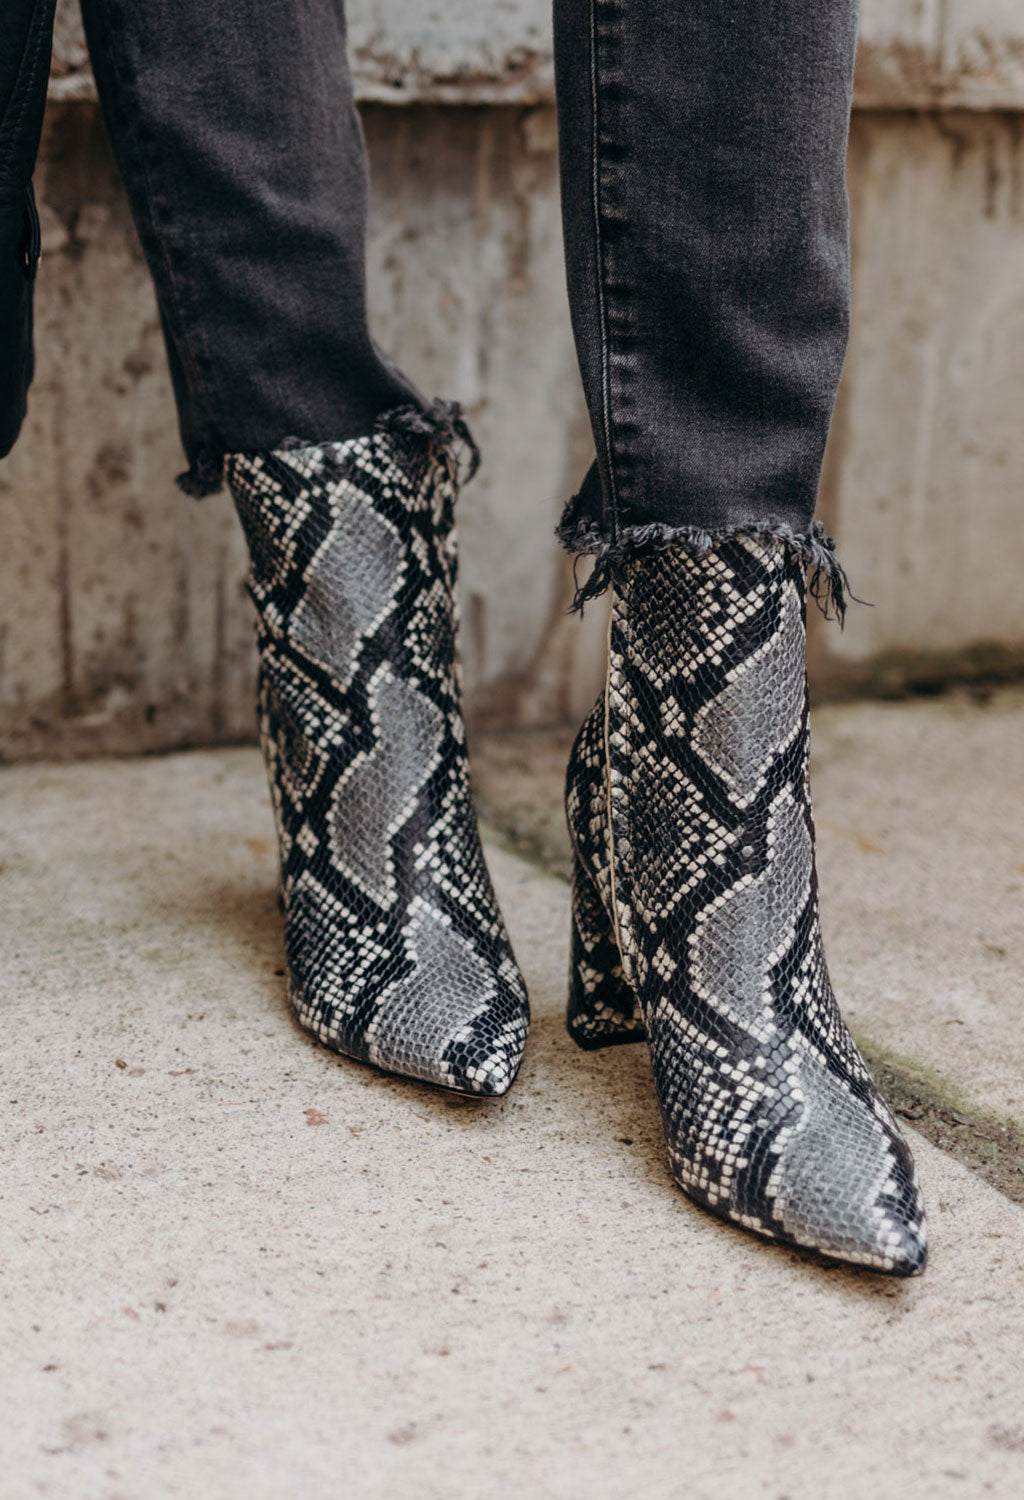 marc fisher snake booties